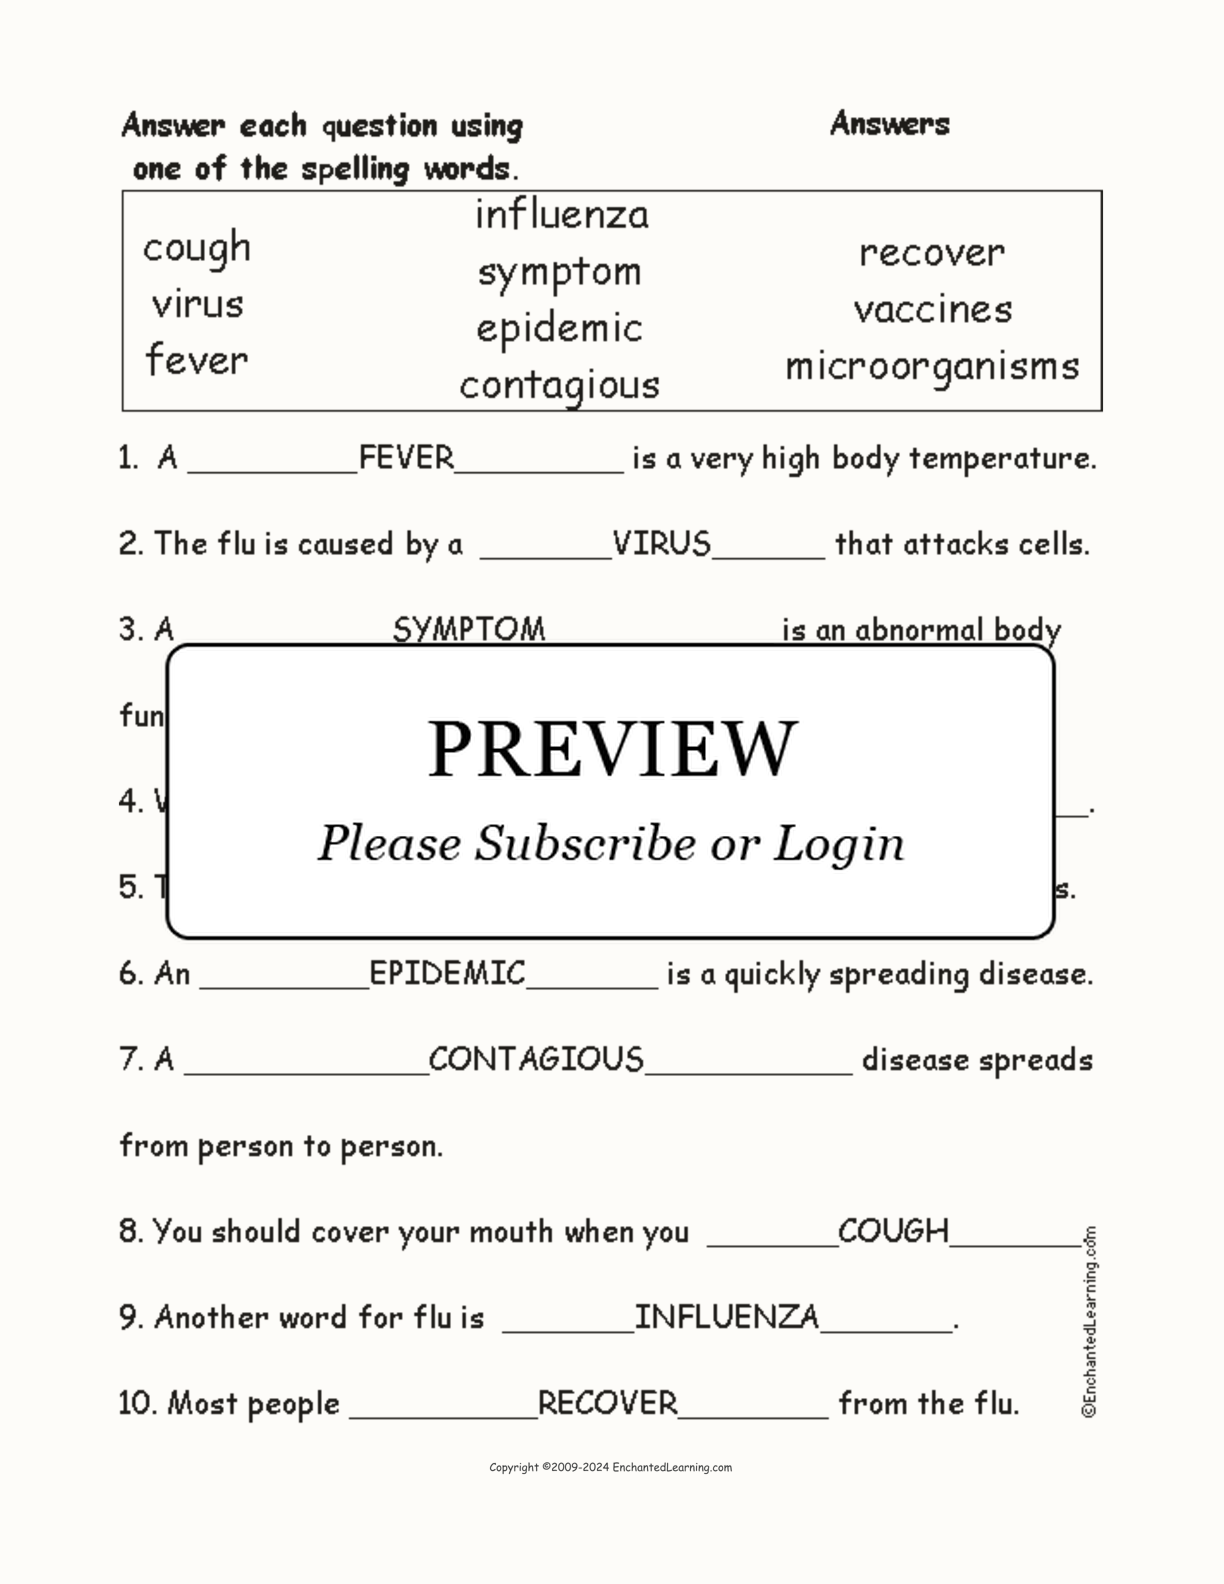 Flu Spelling Word Questions interactive worksheet page 2